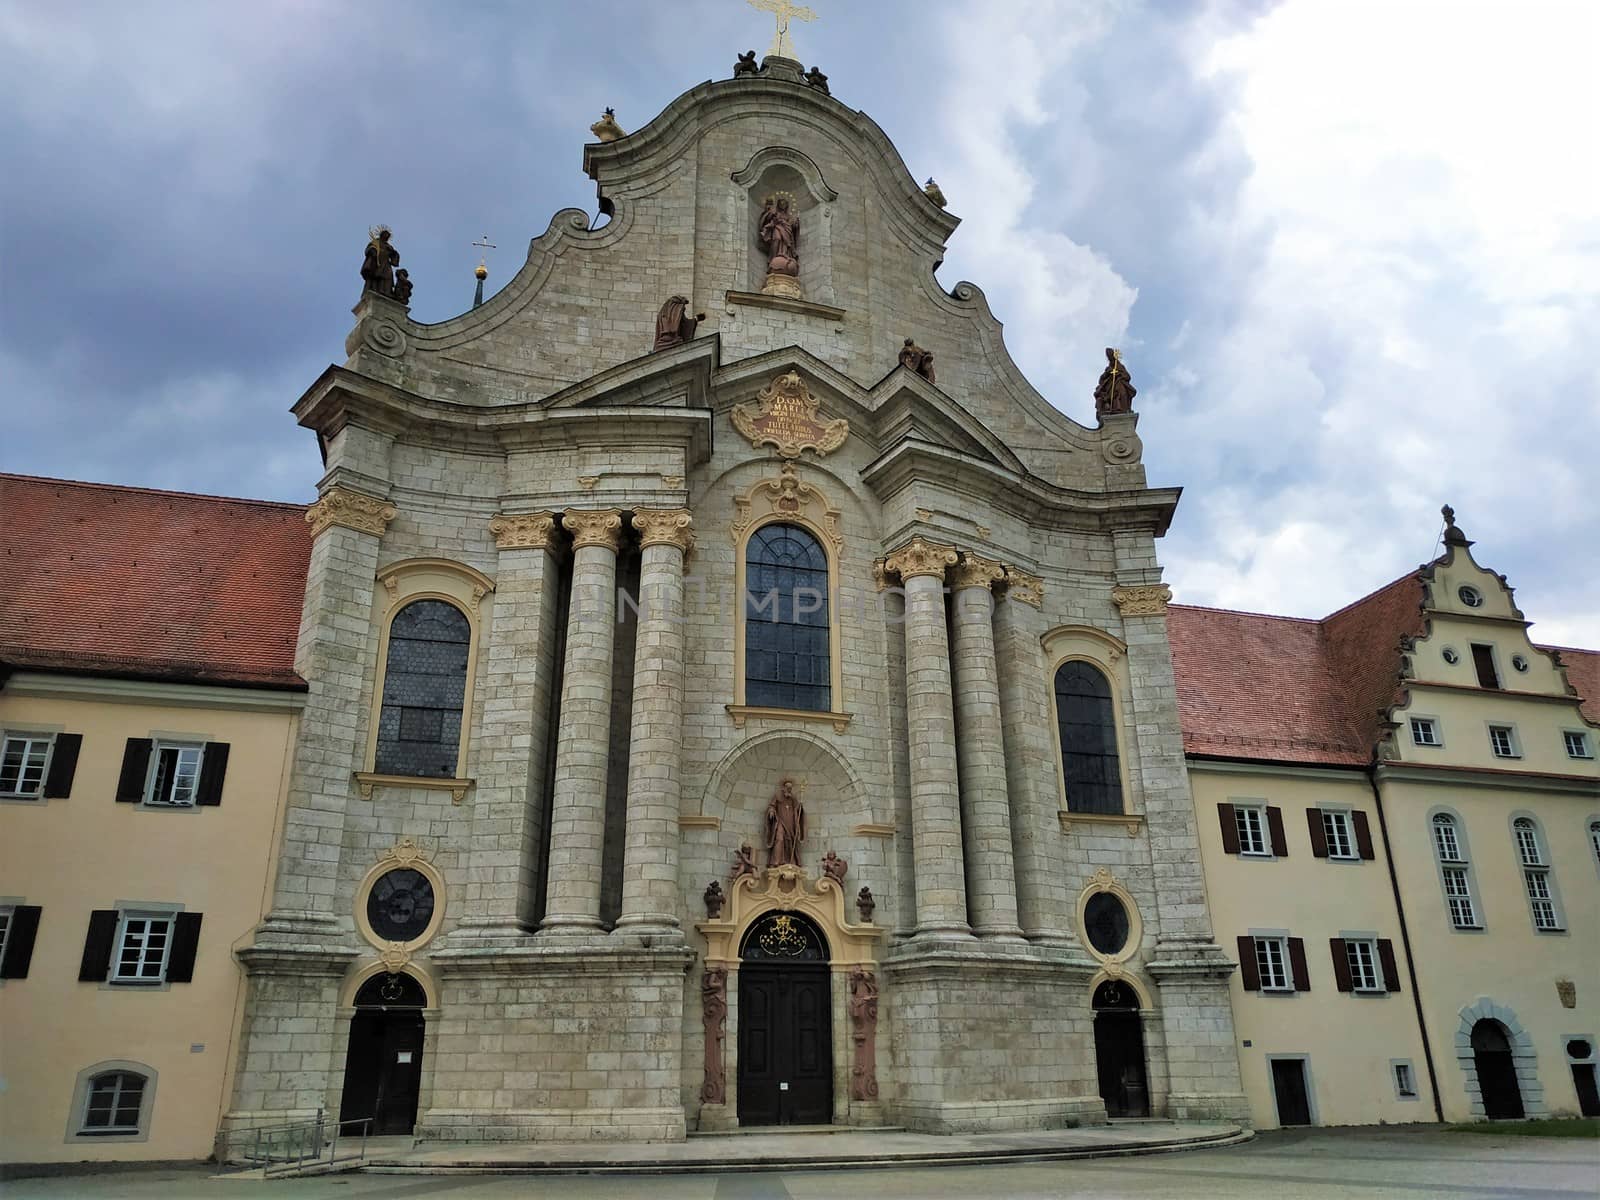 The beautiful facade of the cathedral of Zwiefalten, Germany